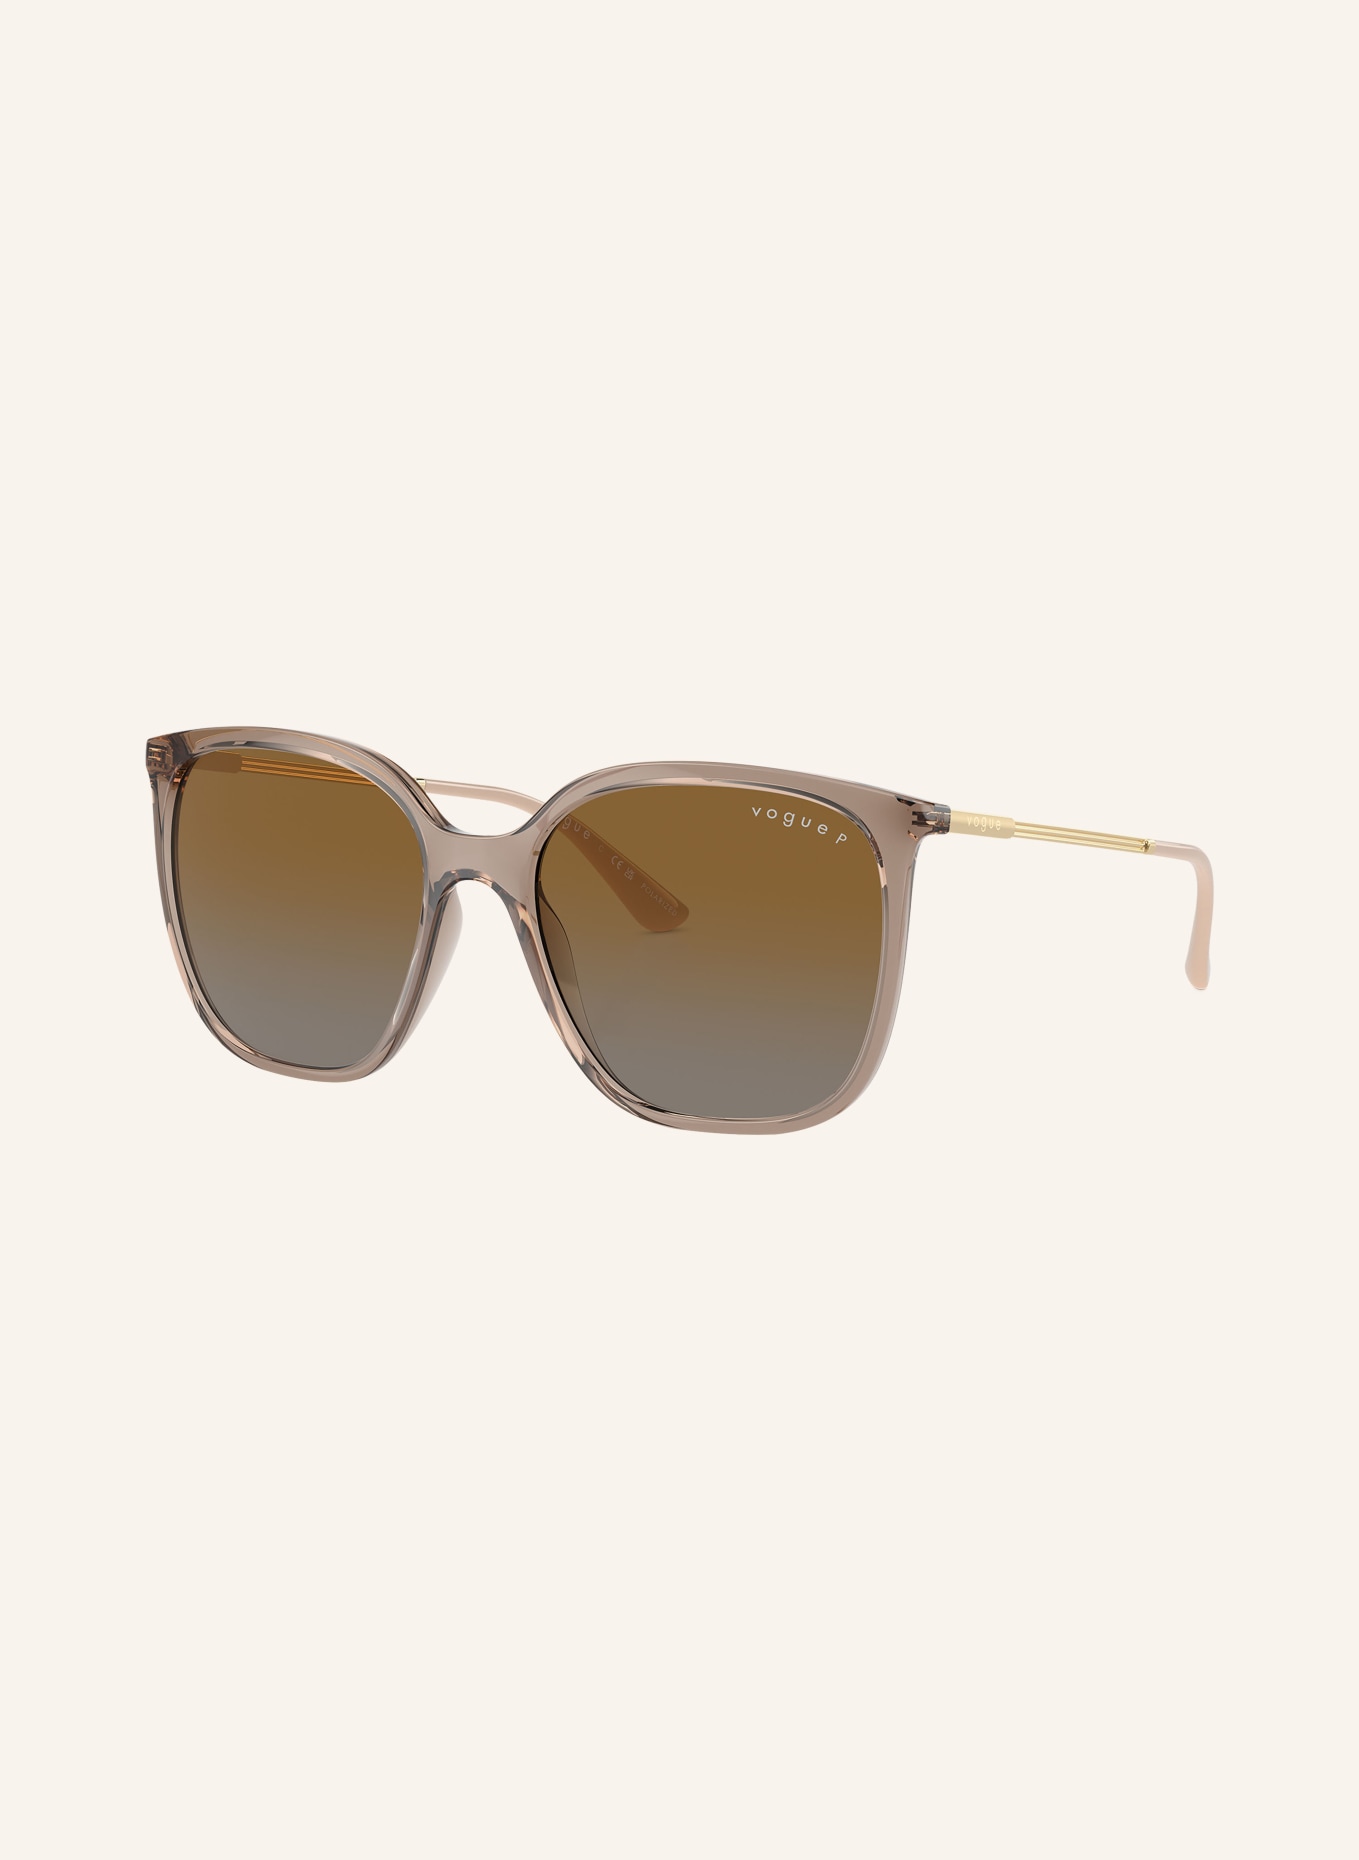 VOGUE Sunglasses VO5564S, Color: 2940T5 - BROWN/ BROWN POLARIZED (Image 1)